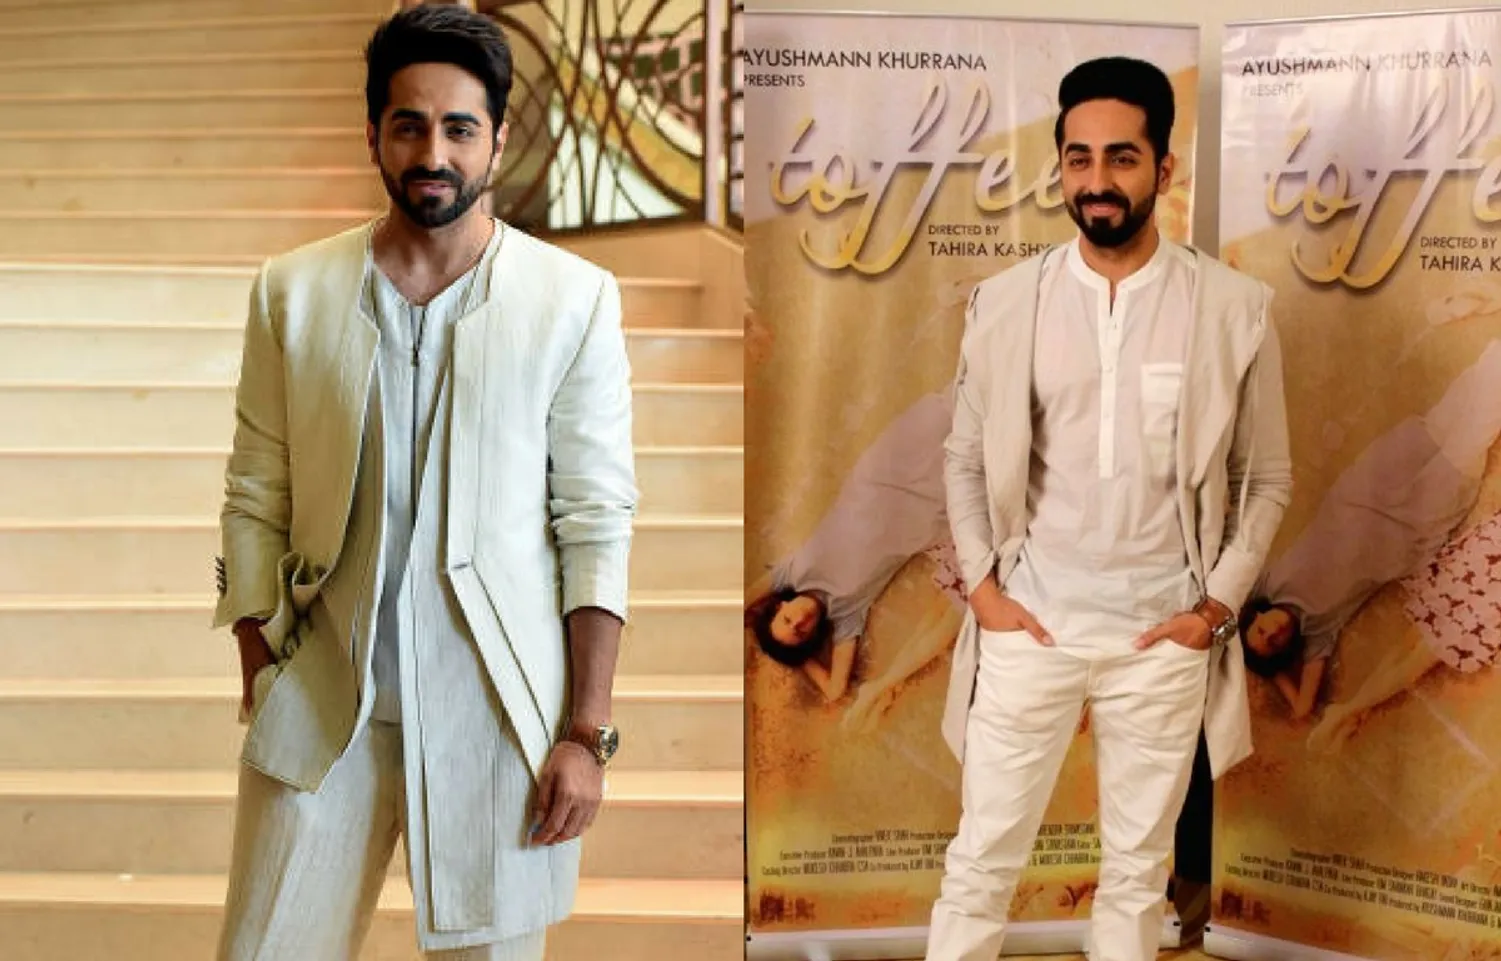 THESE 15 PICTURES OF AYUSHMANN KHURRANA PROVES HIS FASHION SENSE IS INCREDIBLE